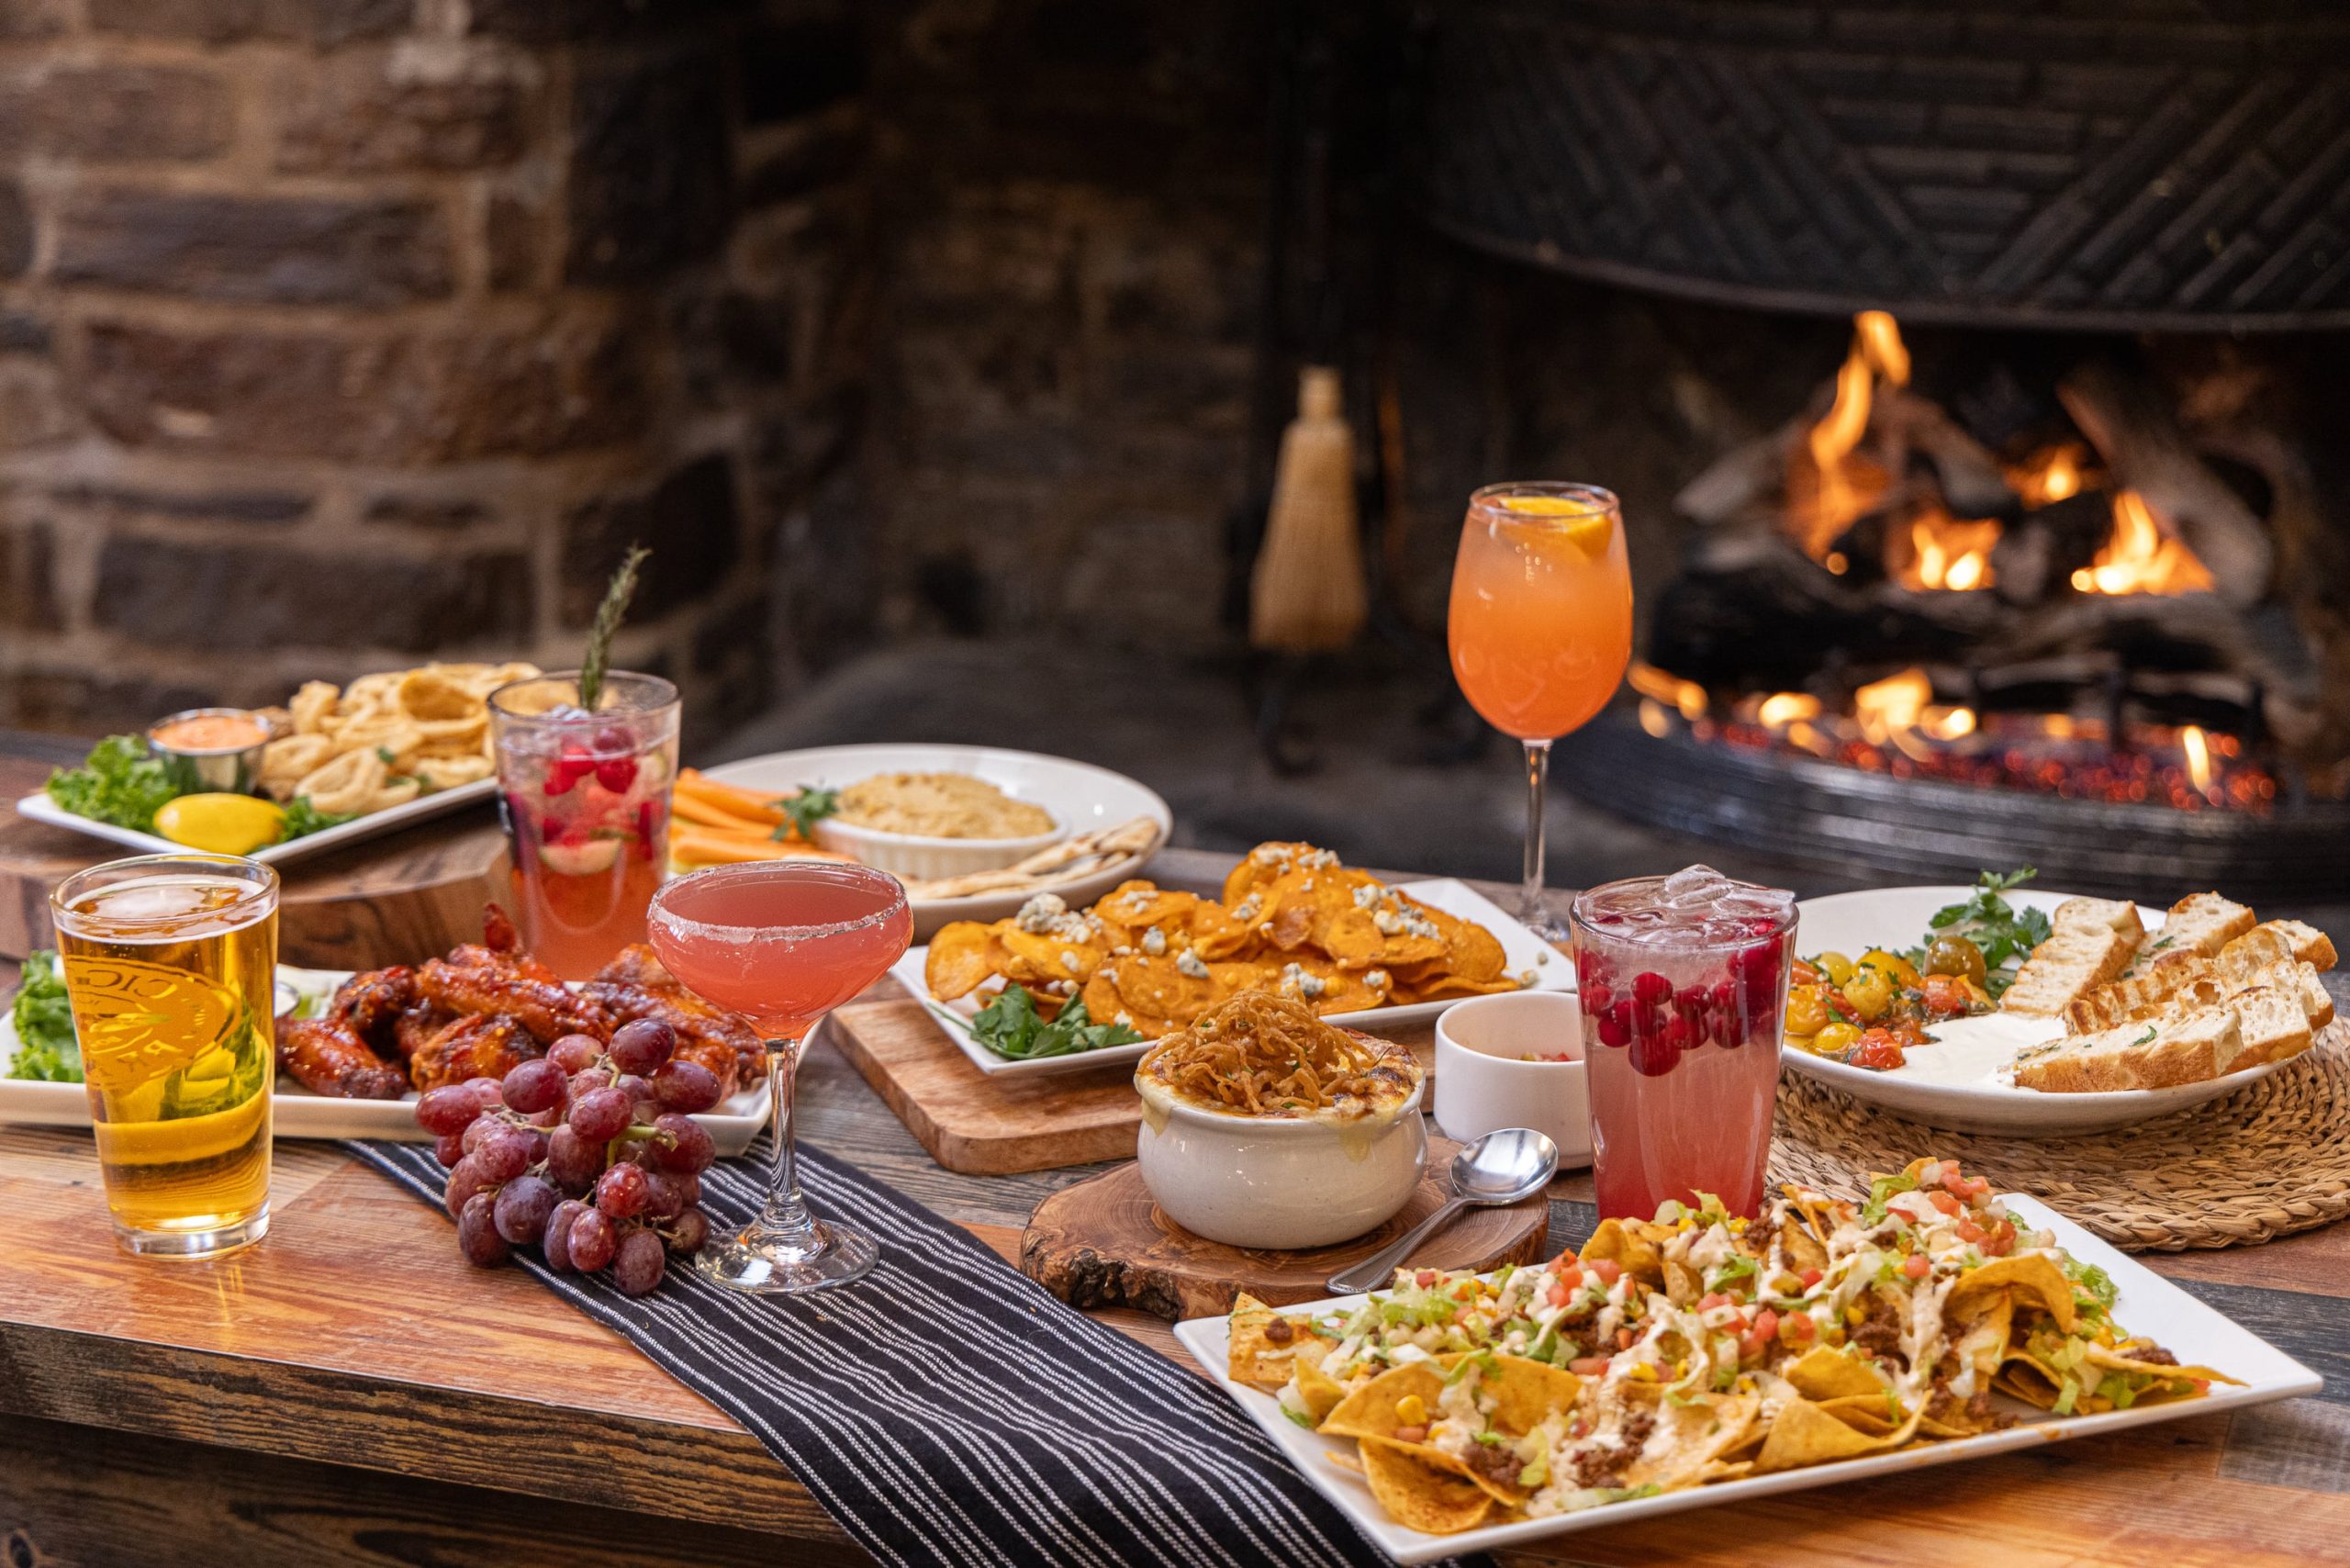 food and drink on table with lit fireplace in the background